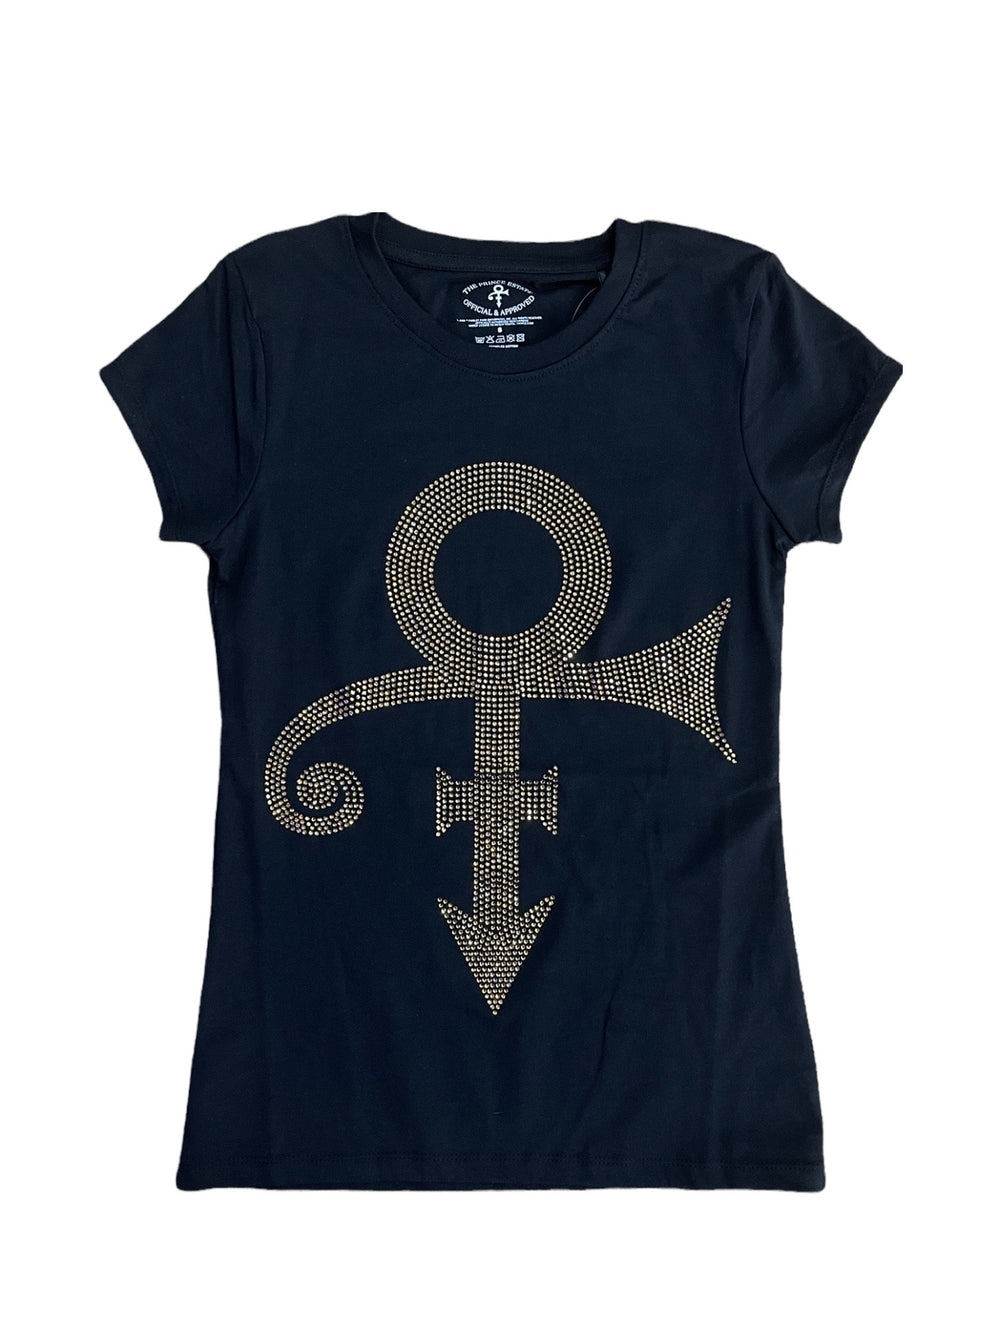 Prince The Gold Experience Love Symbol Diamante Official Ladies Slim Fit T-Shirt